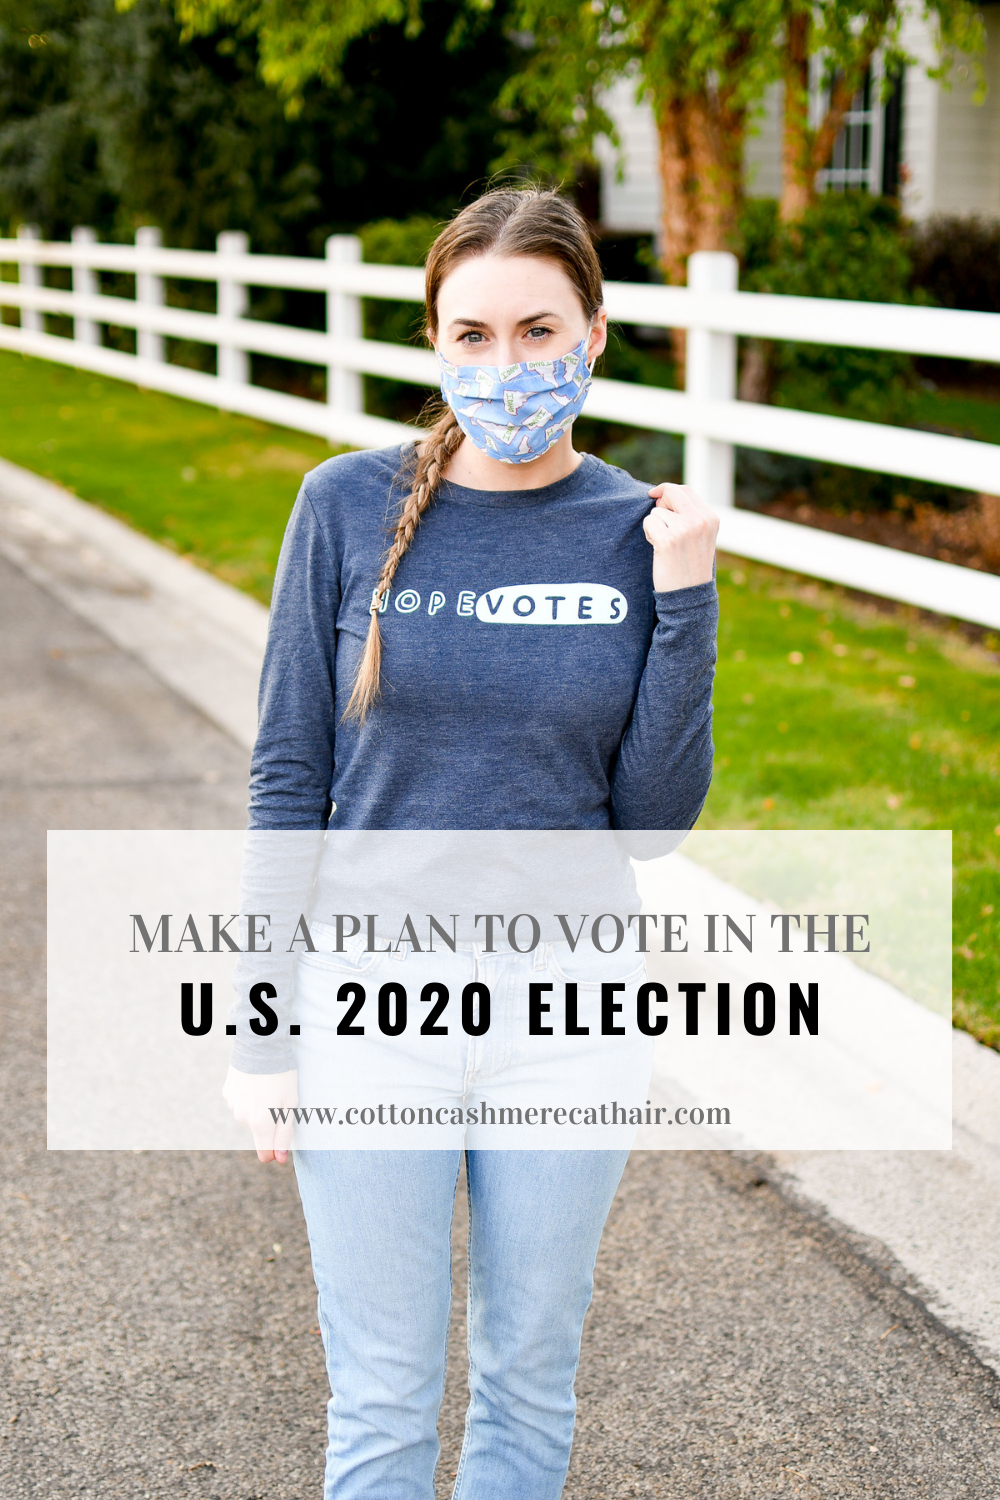 make a plan to vote in the U.S. 2020 election